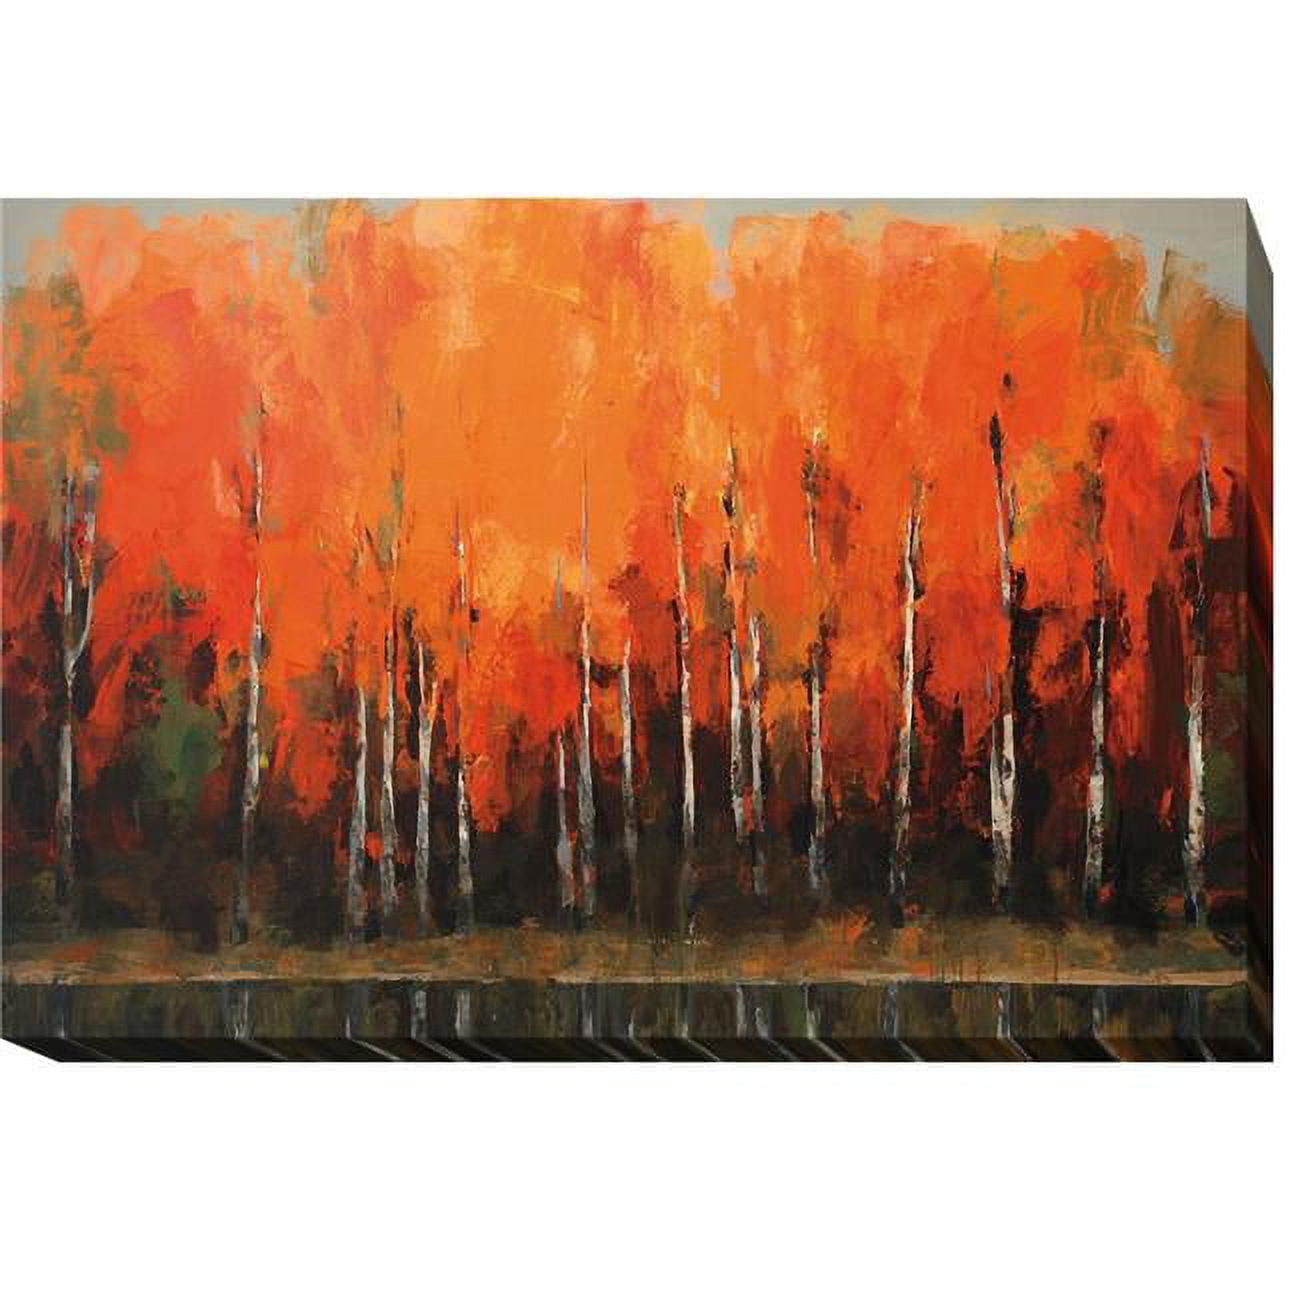 Birch Shoreline By Peter Colbert Premium Gallery-wrapped Canvas Giclee Art - 16 X 24 X 1.5 In.